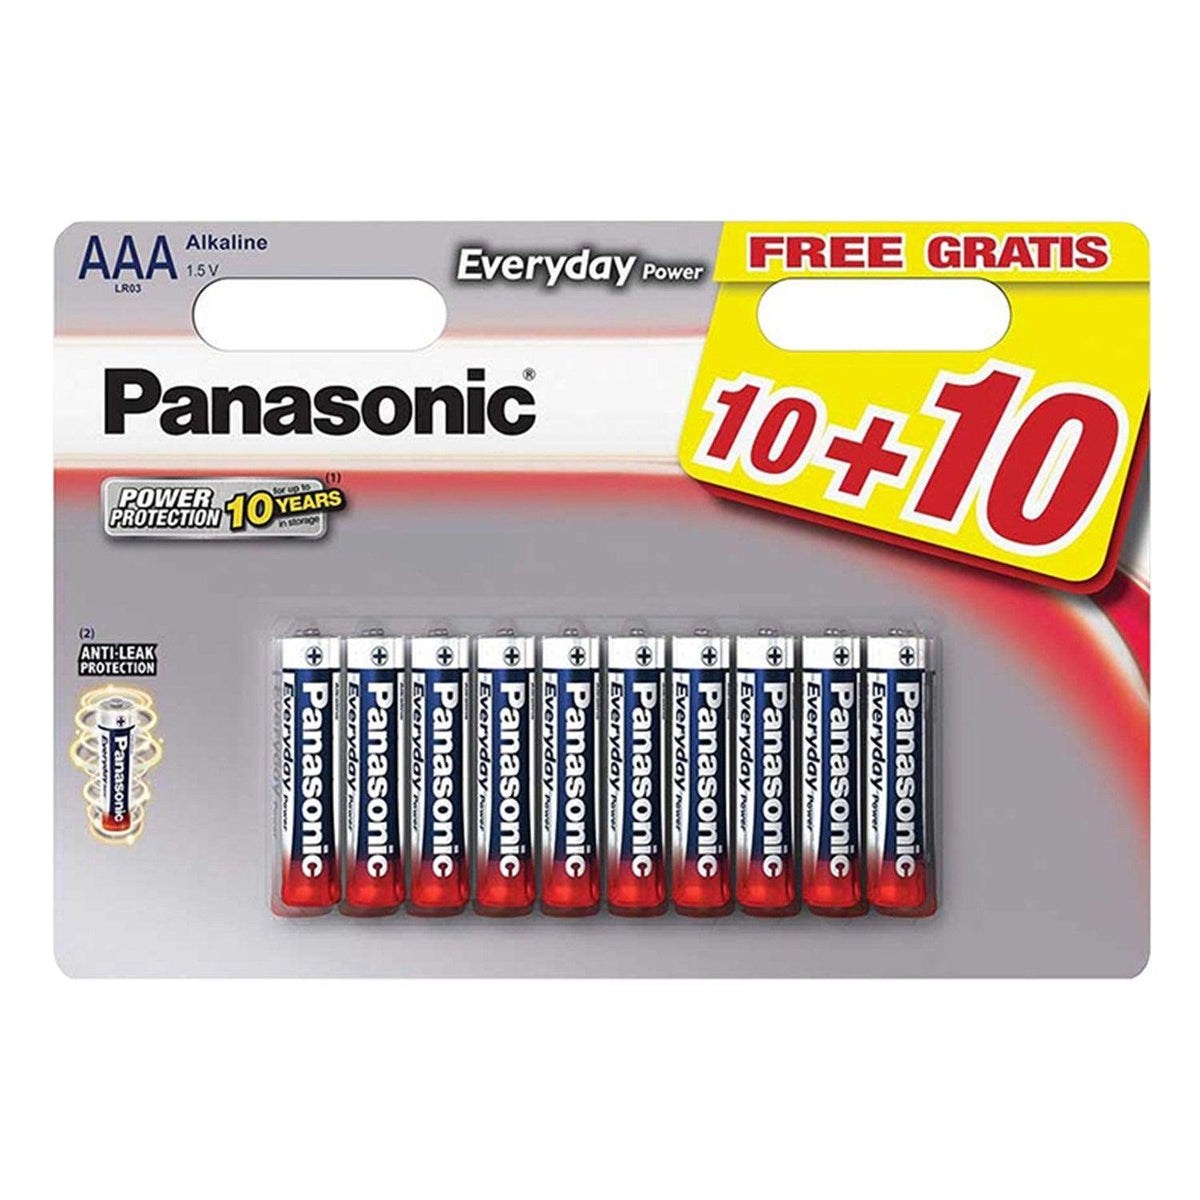 Panasonic Everyday Power AAA 10+10 Free Batteries | Pack of 20 | LR03 - Choice Stores